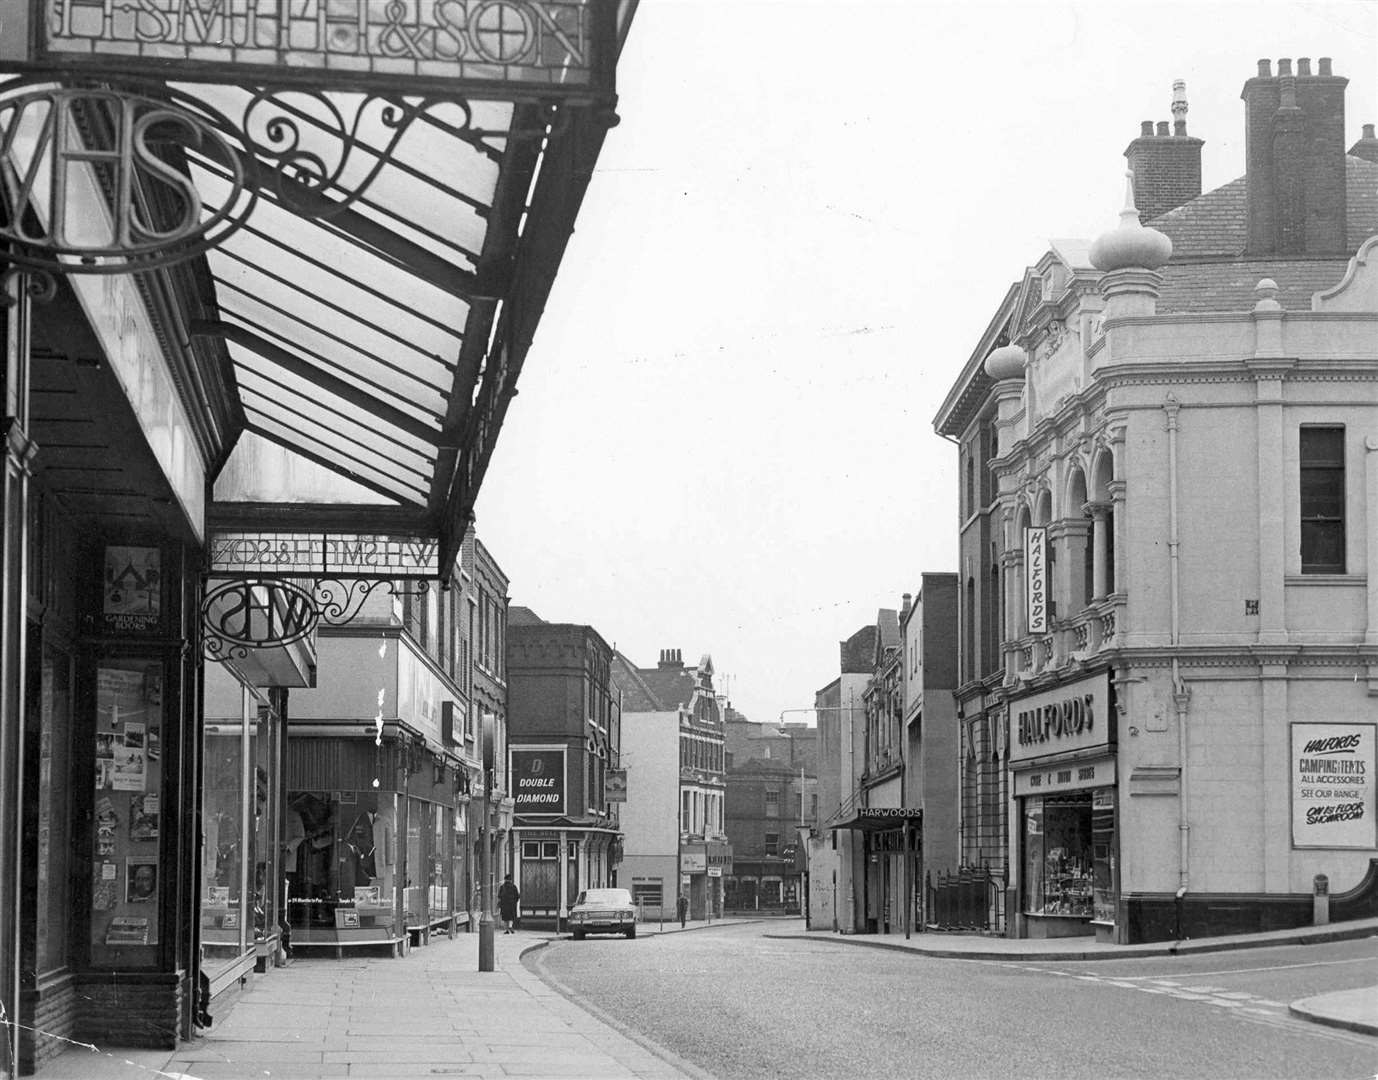 The top end of Chatham High Street in 1969